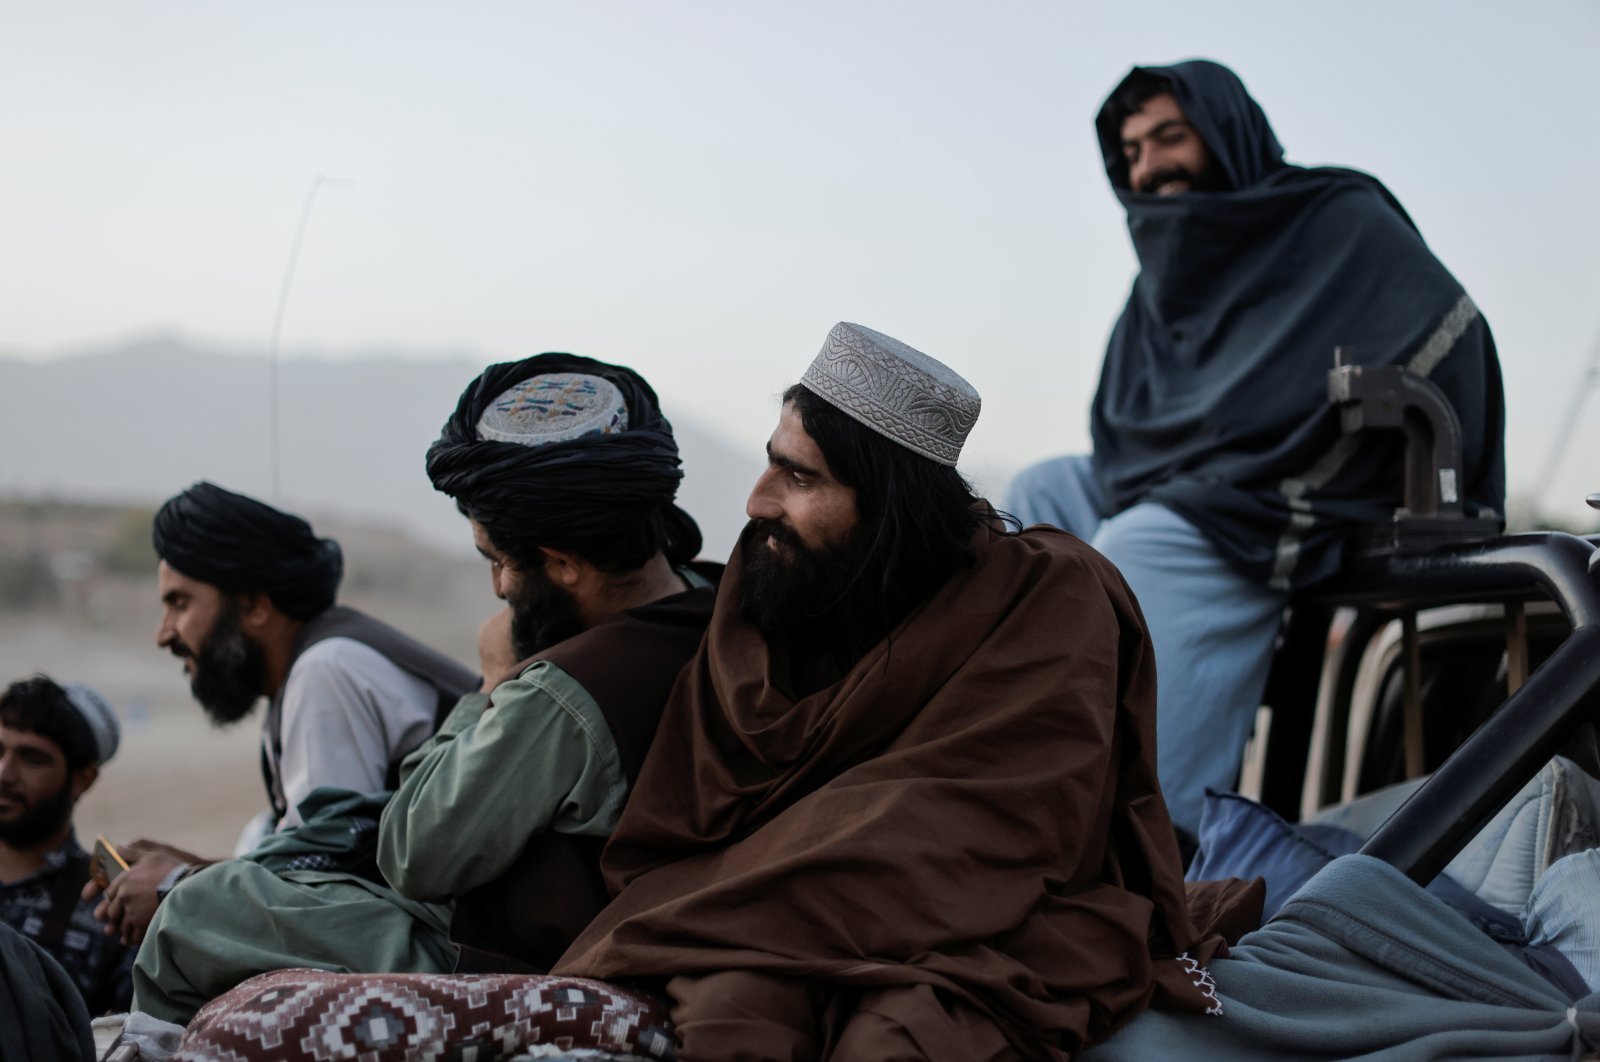 Taliban fighters sit on a vehicle as they take a day off to visit the amusement park at Kabul's Qargha reservoir, at the outskirts of Kabul, Afghanistan October 8, 2021. (Reuters Photo)